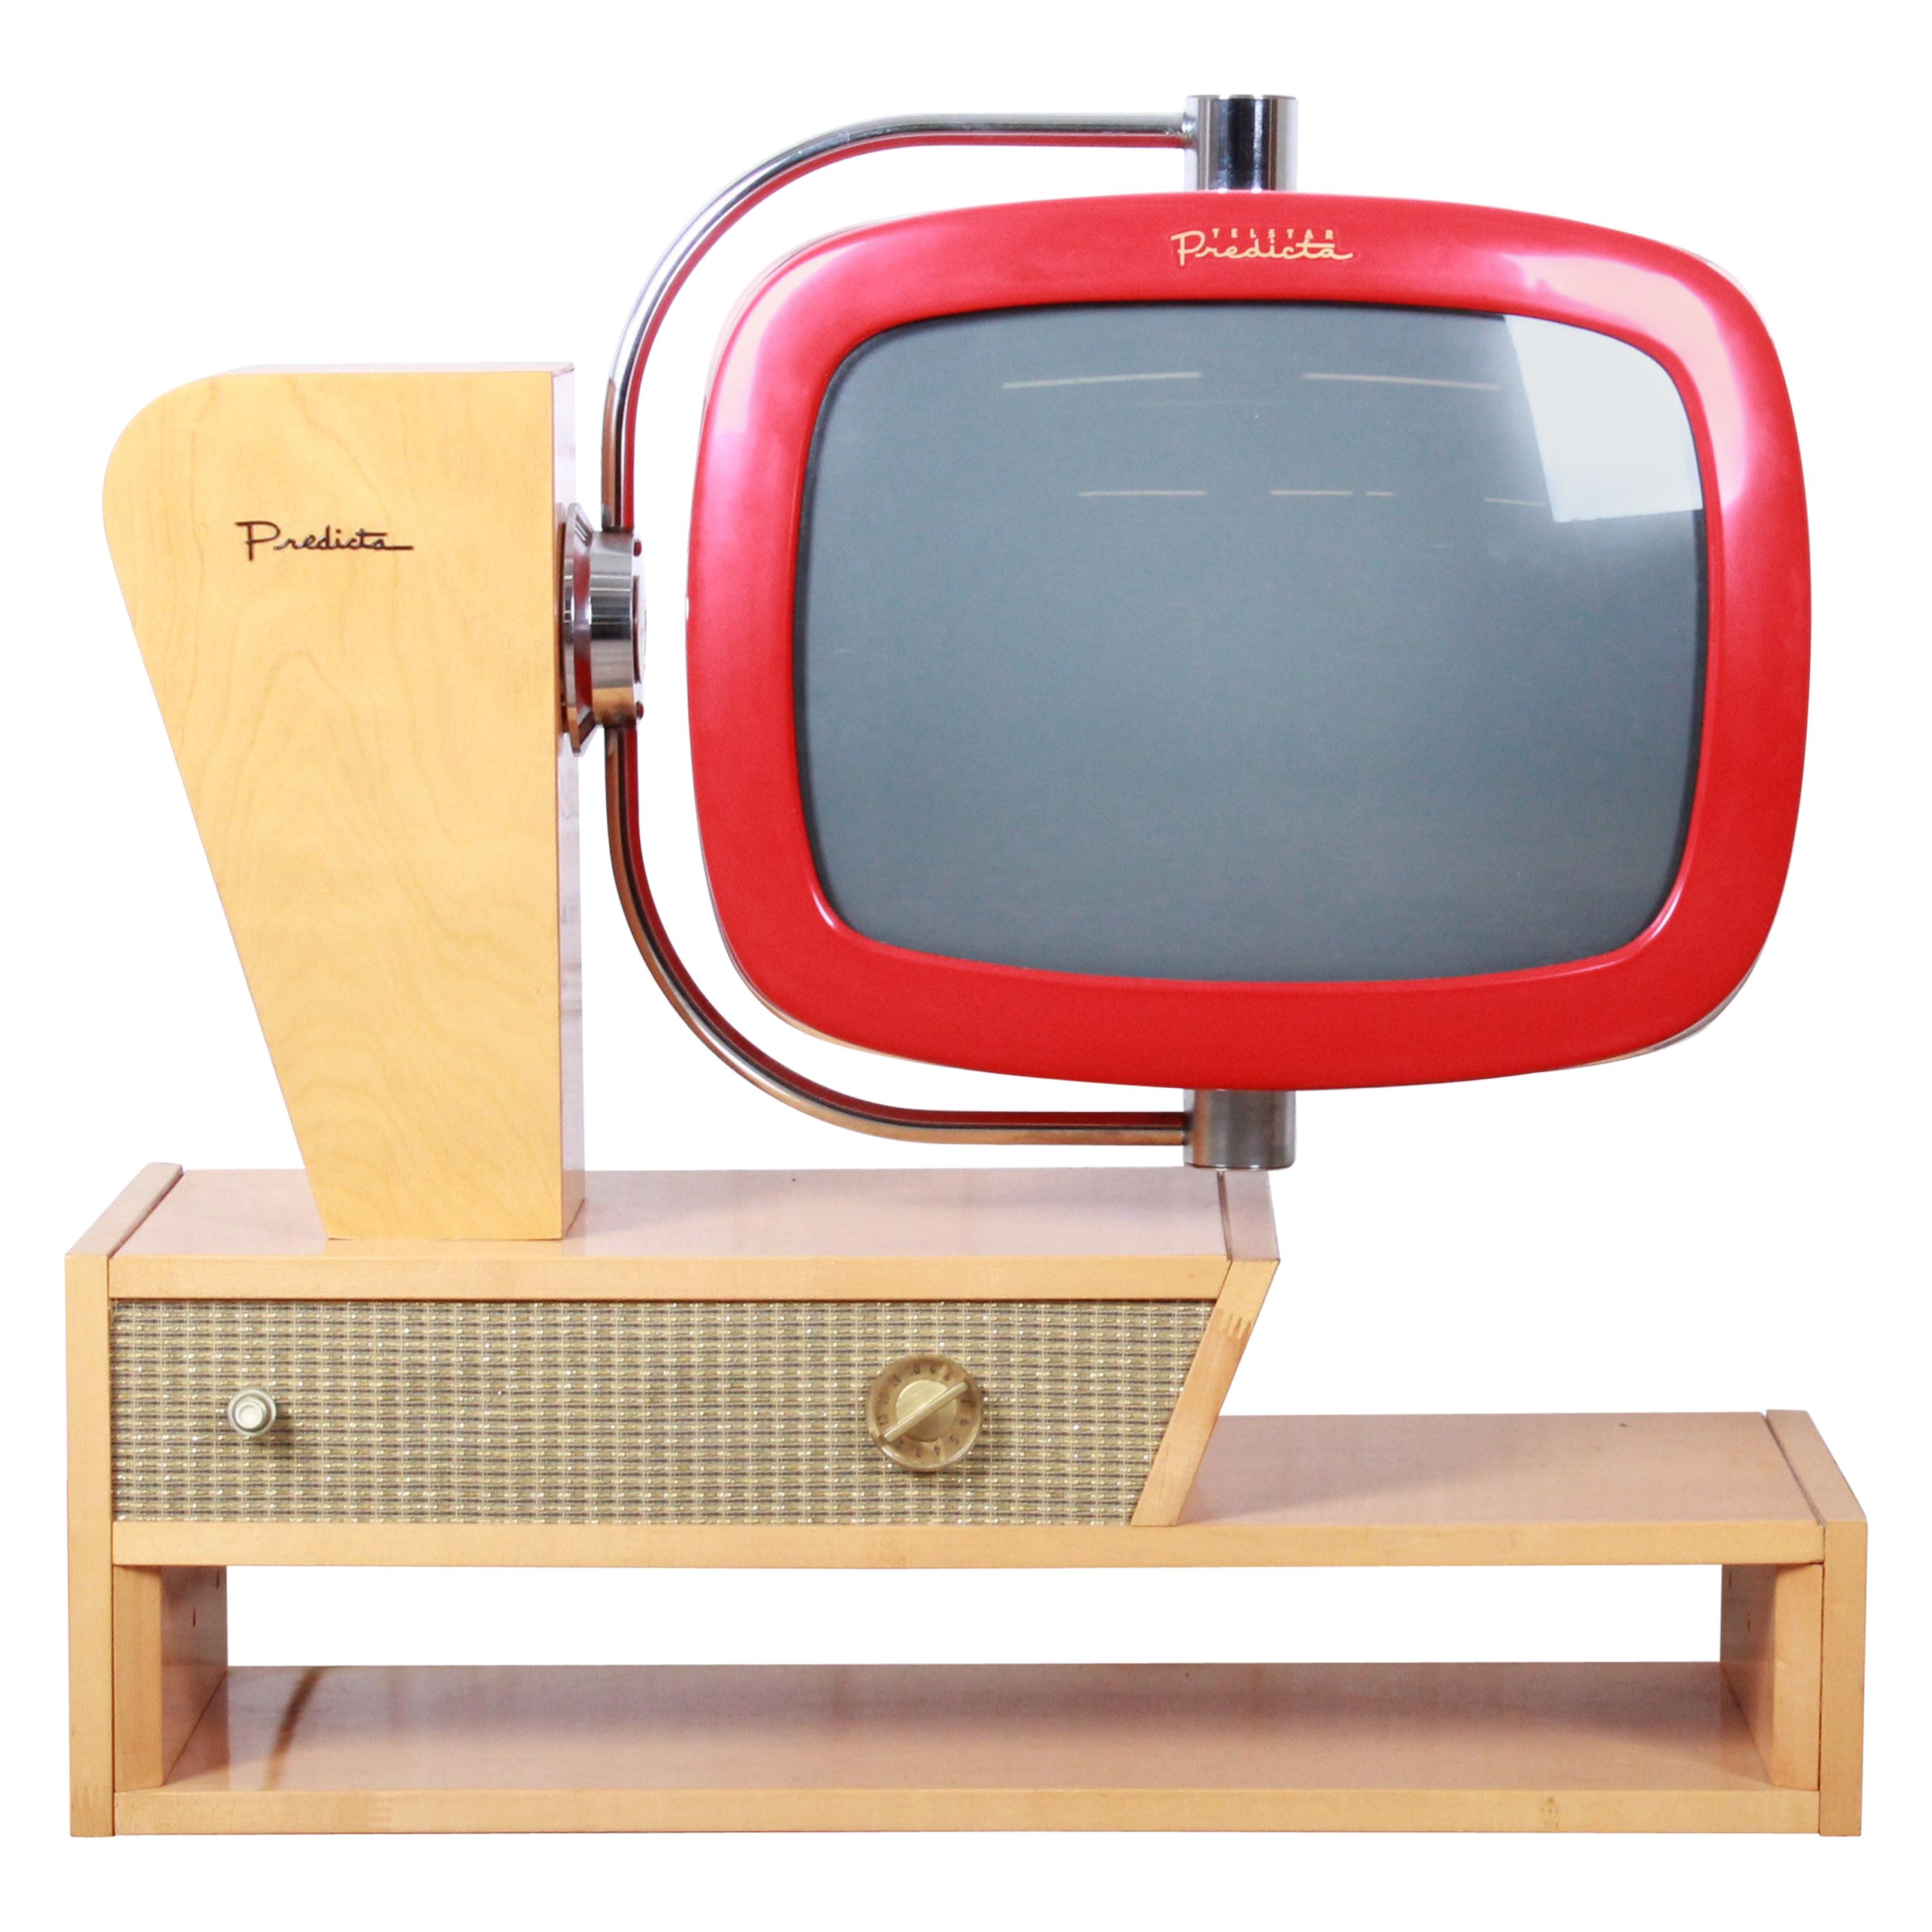 Predicta Chalet Mid-Century Modern Space Age Television by Telstar